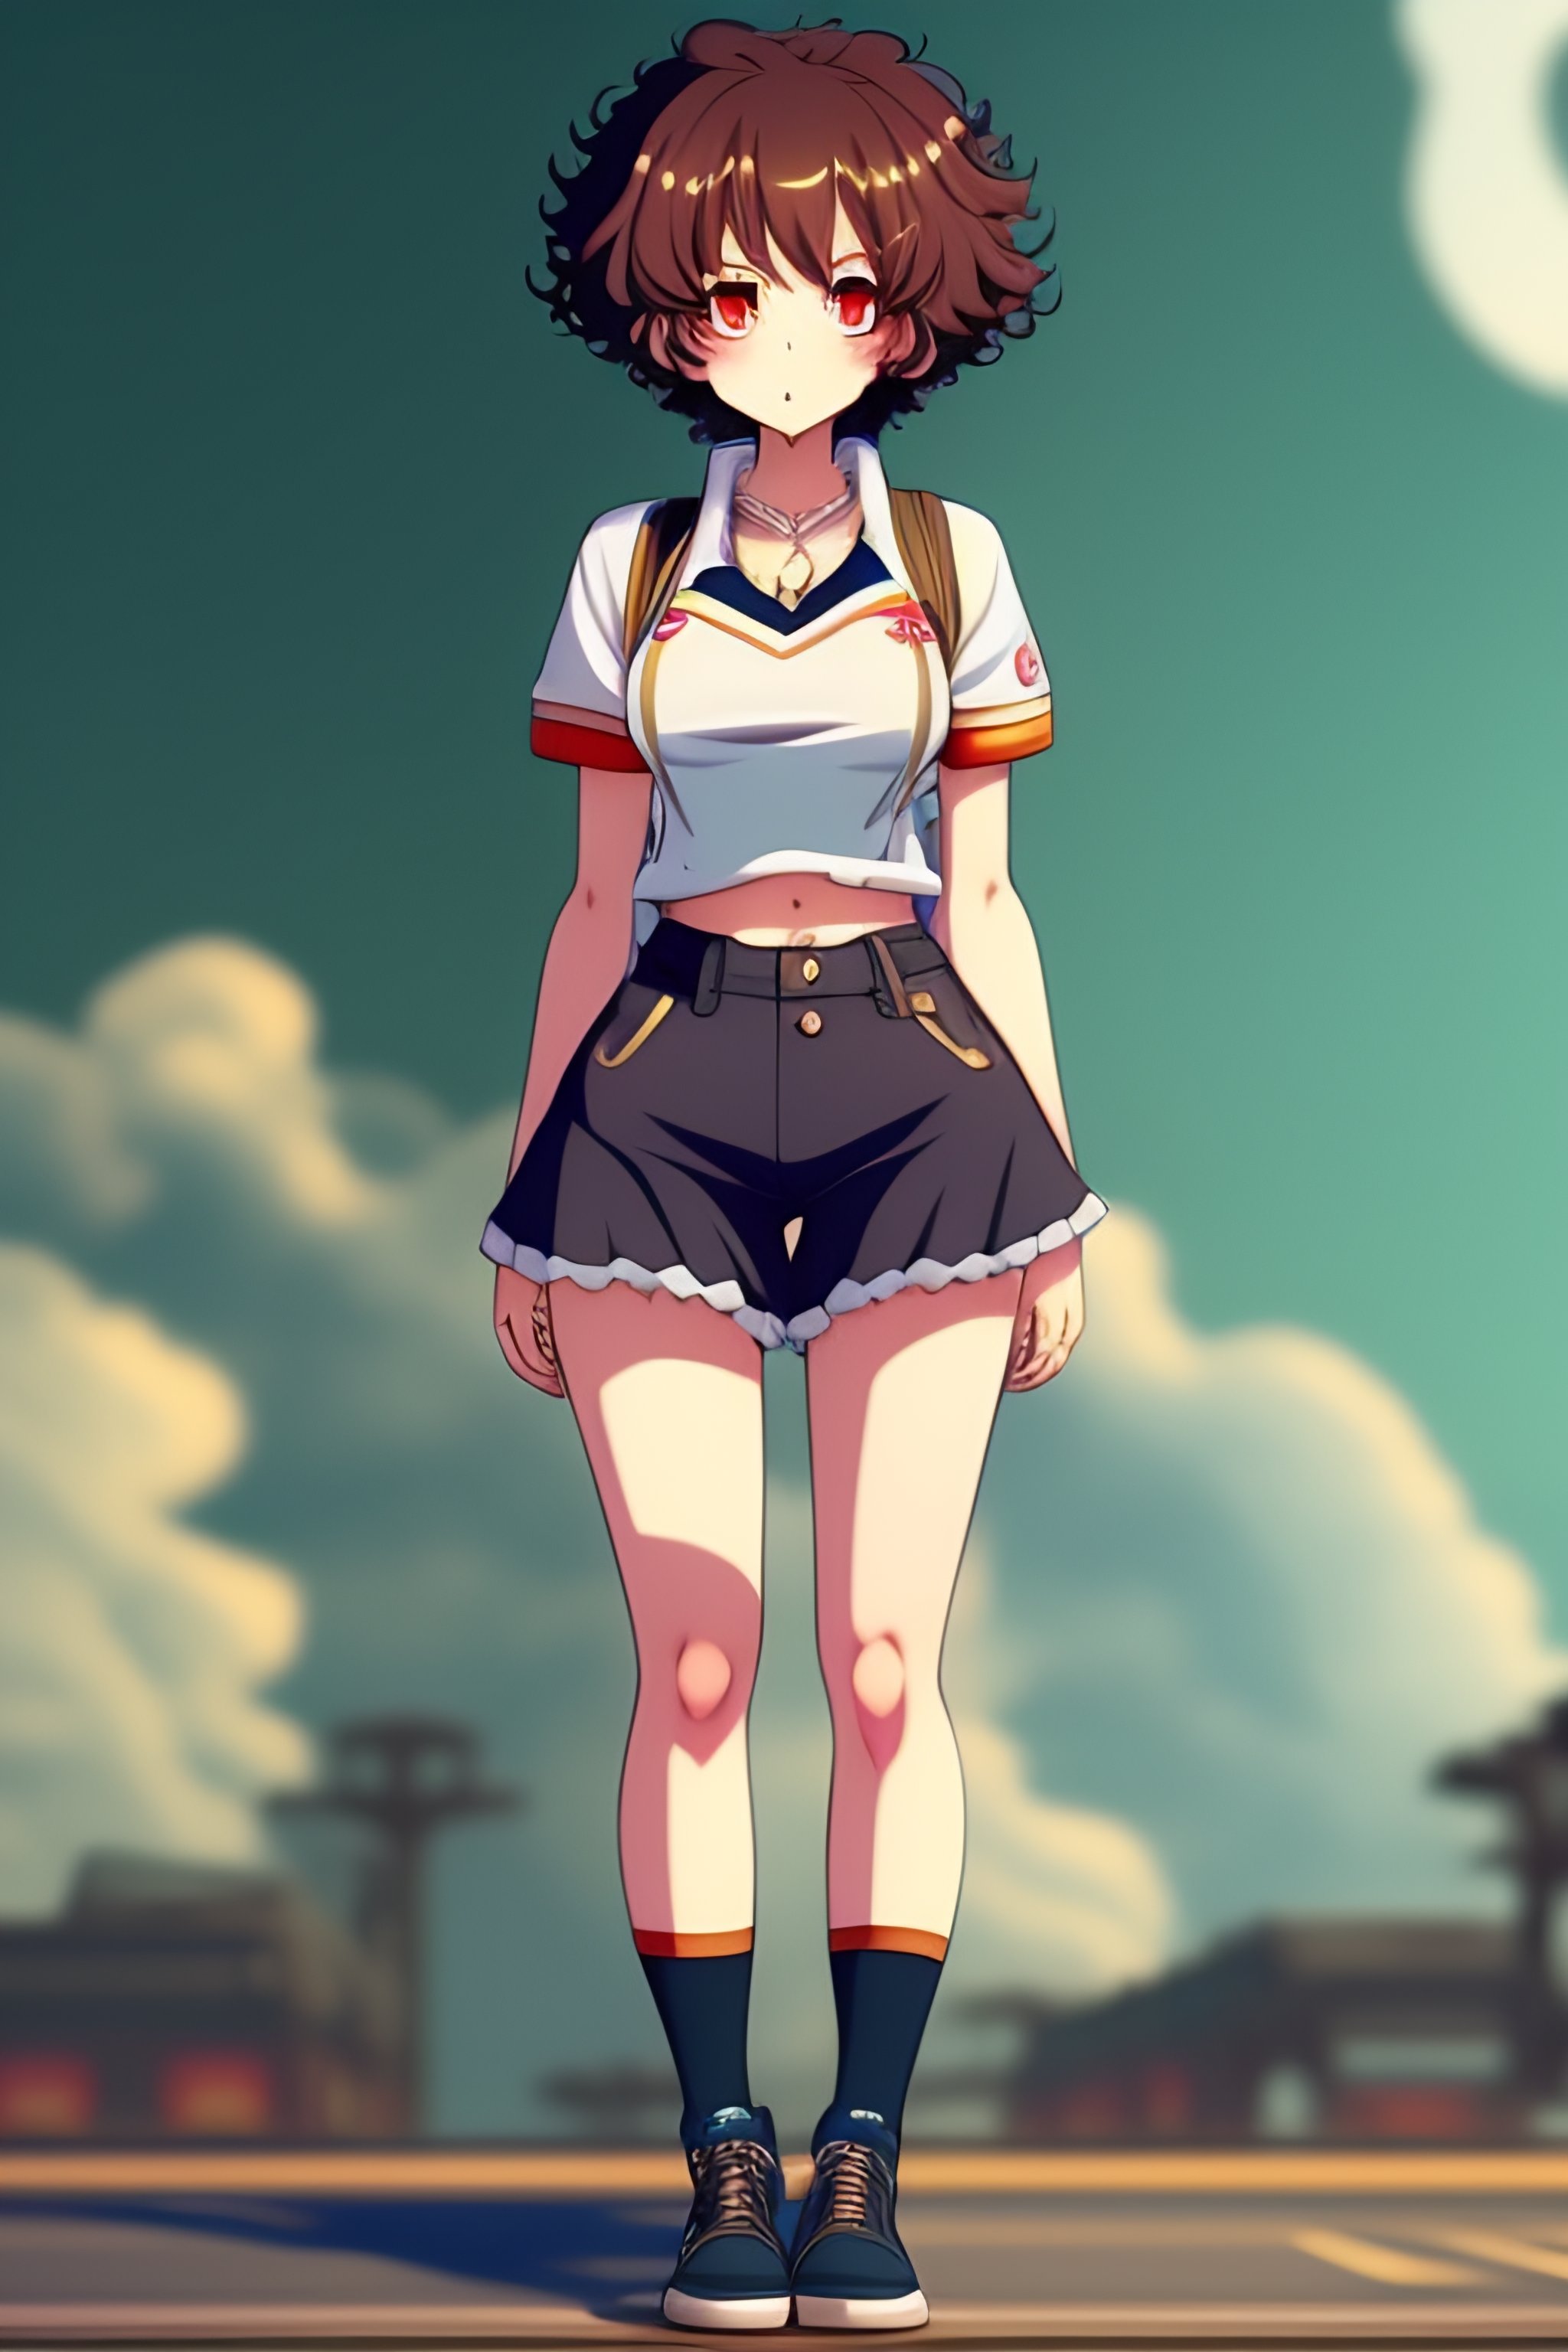 Anime girl with shorts